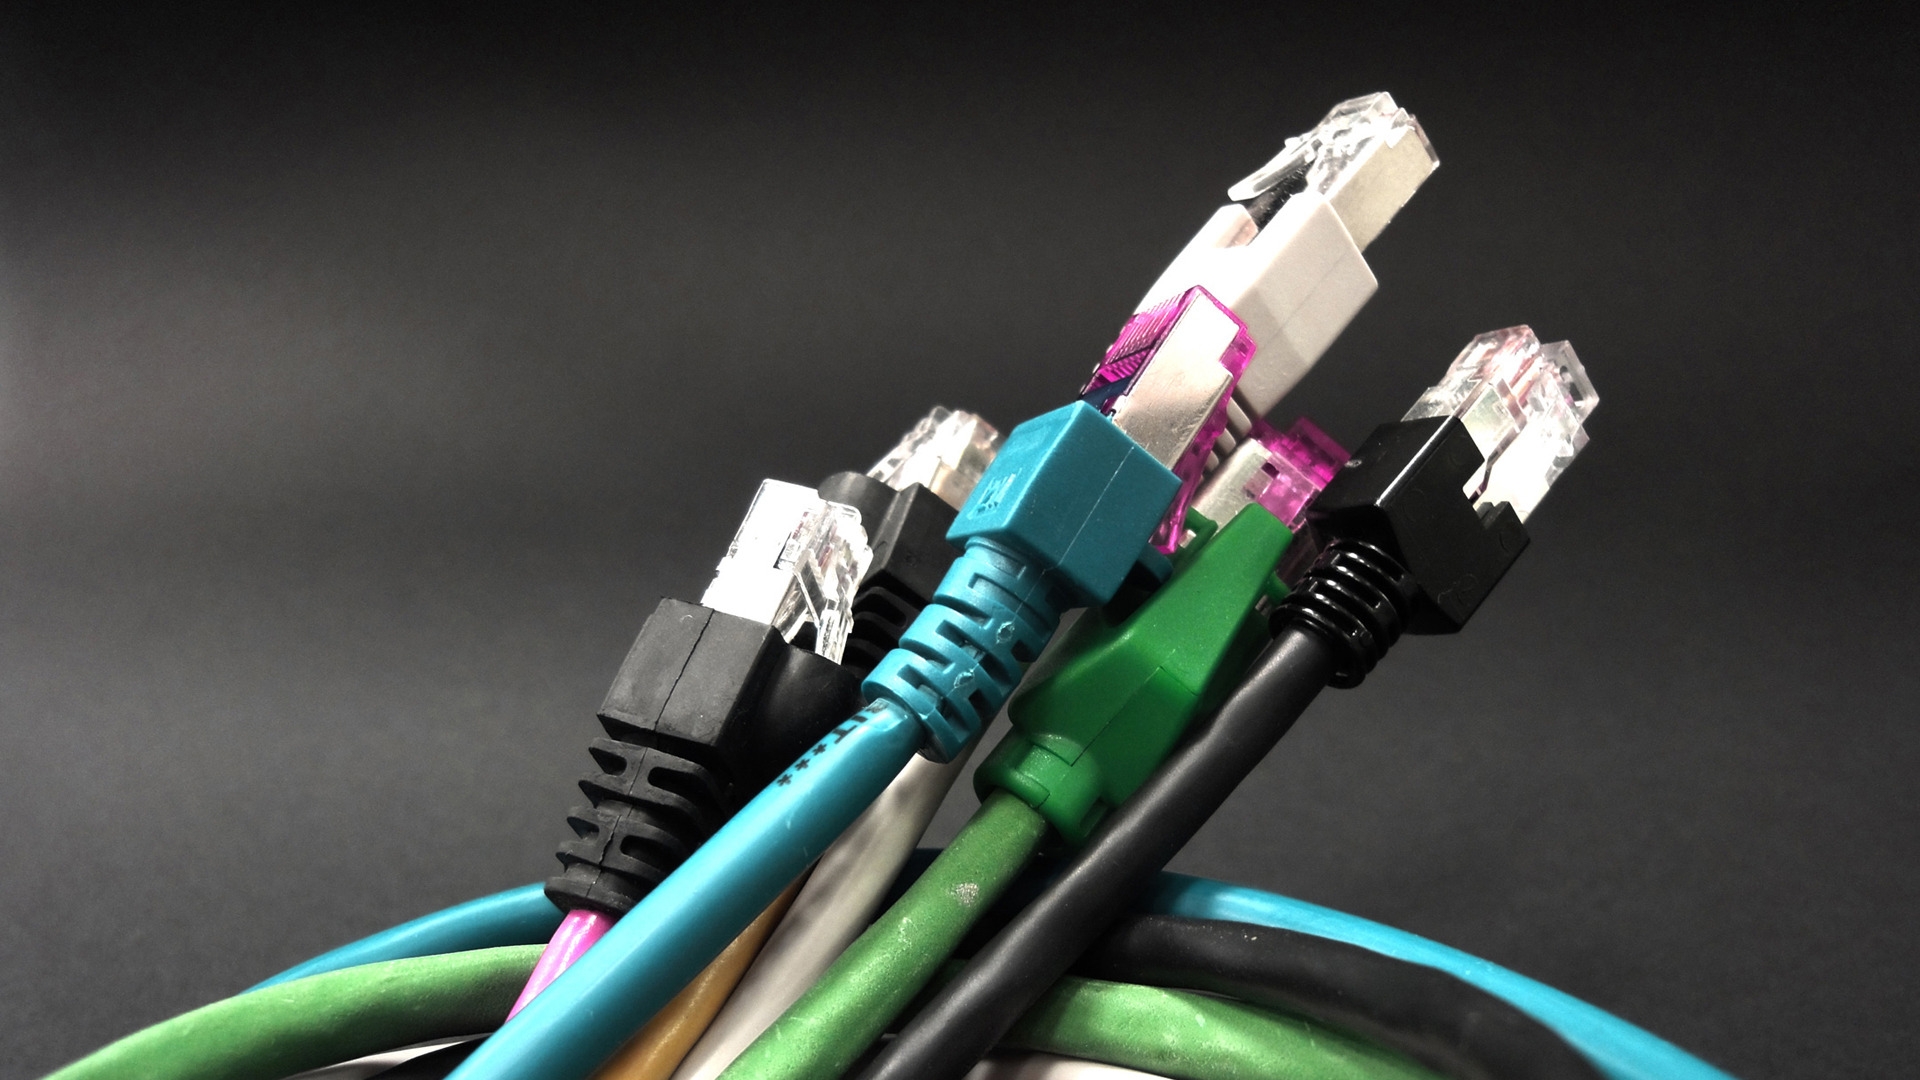 Internet Cables for 1920 x 1080 HDTV 1080p resolution